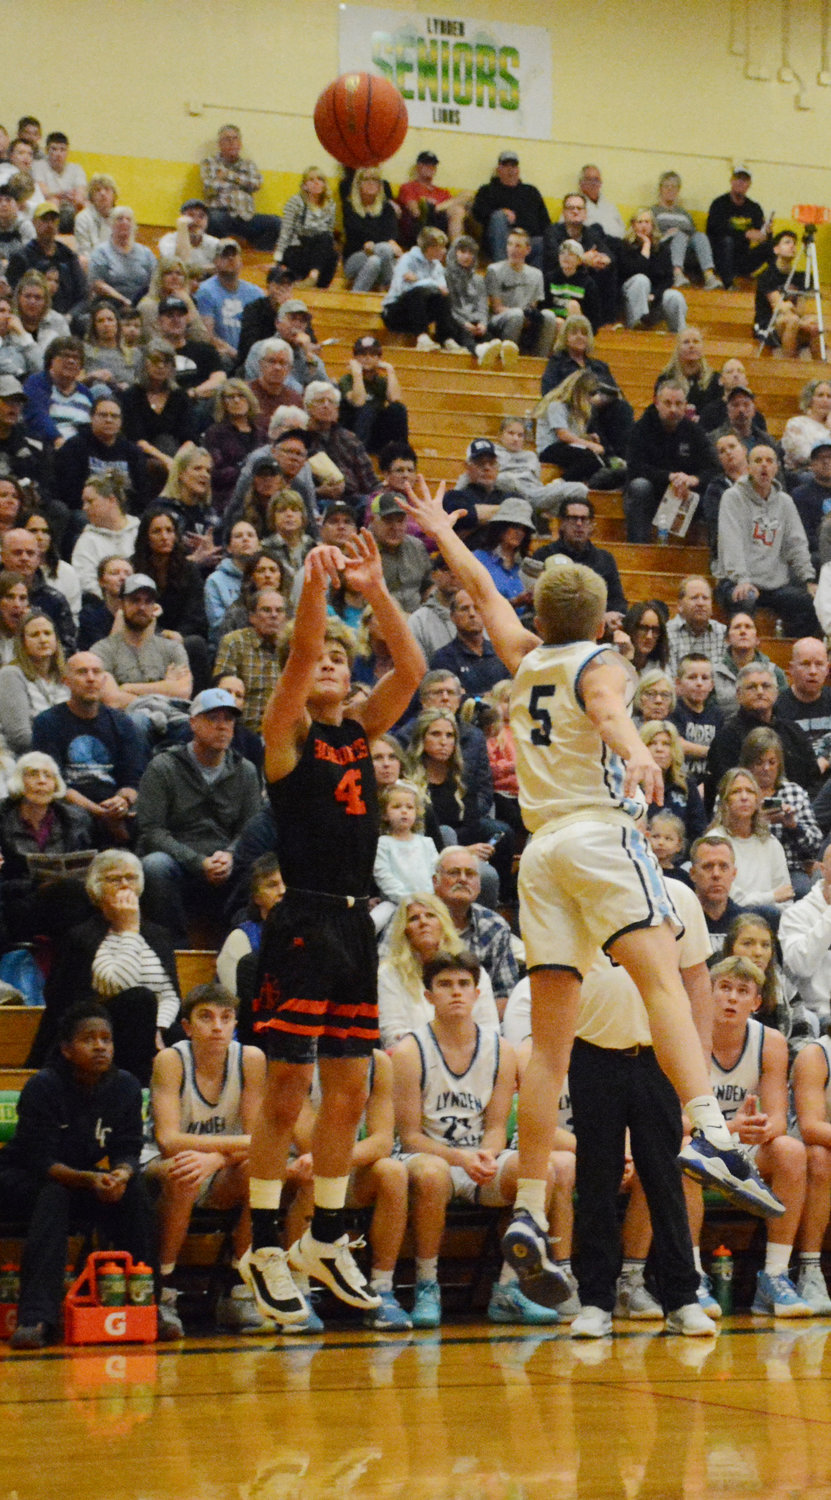 Noah Tavis shoots a 3-pointer in Blaine’s district championship loss to Lynden Christian February 11 at Lynden High School. If both Whatcom teams continue to win, they could meet again in the state championship.